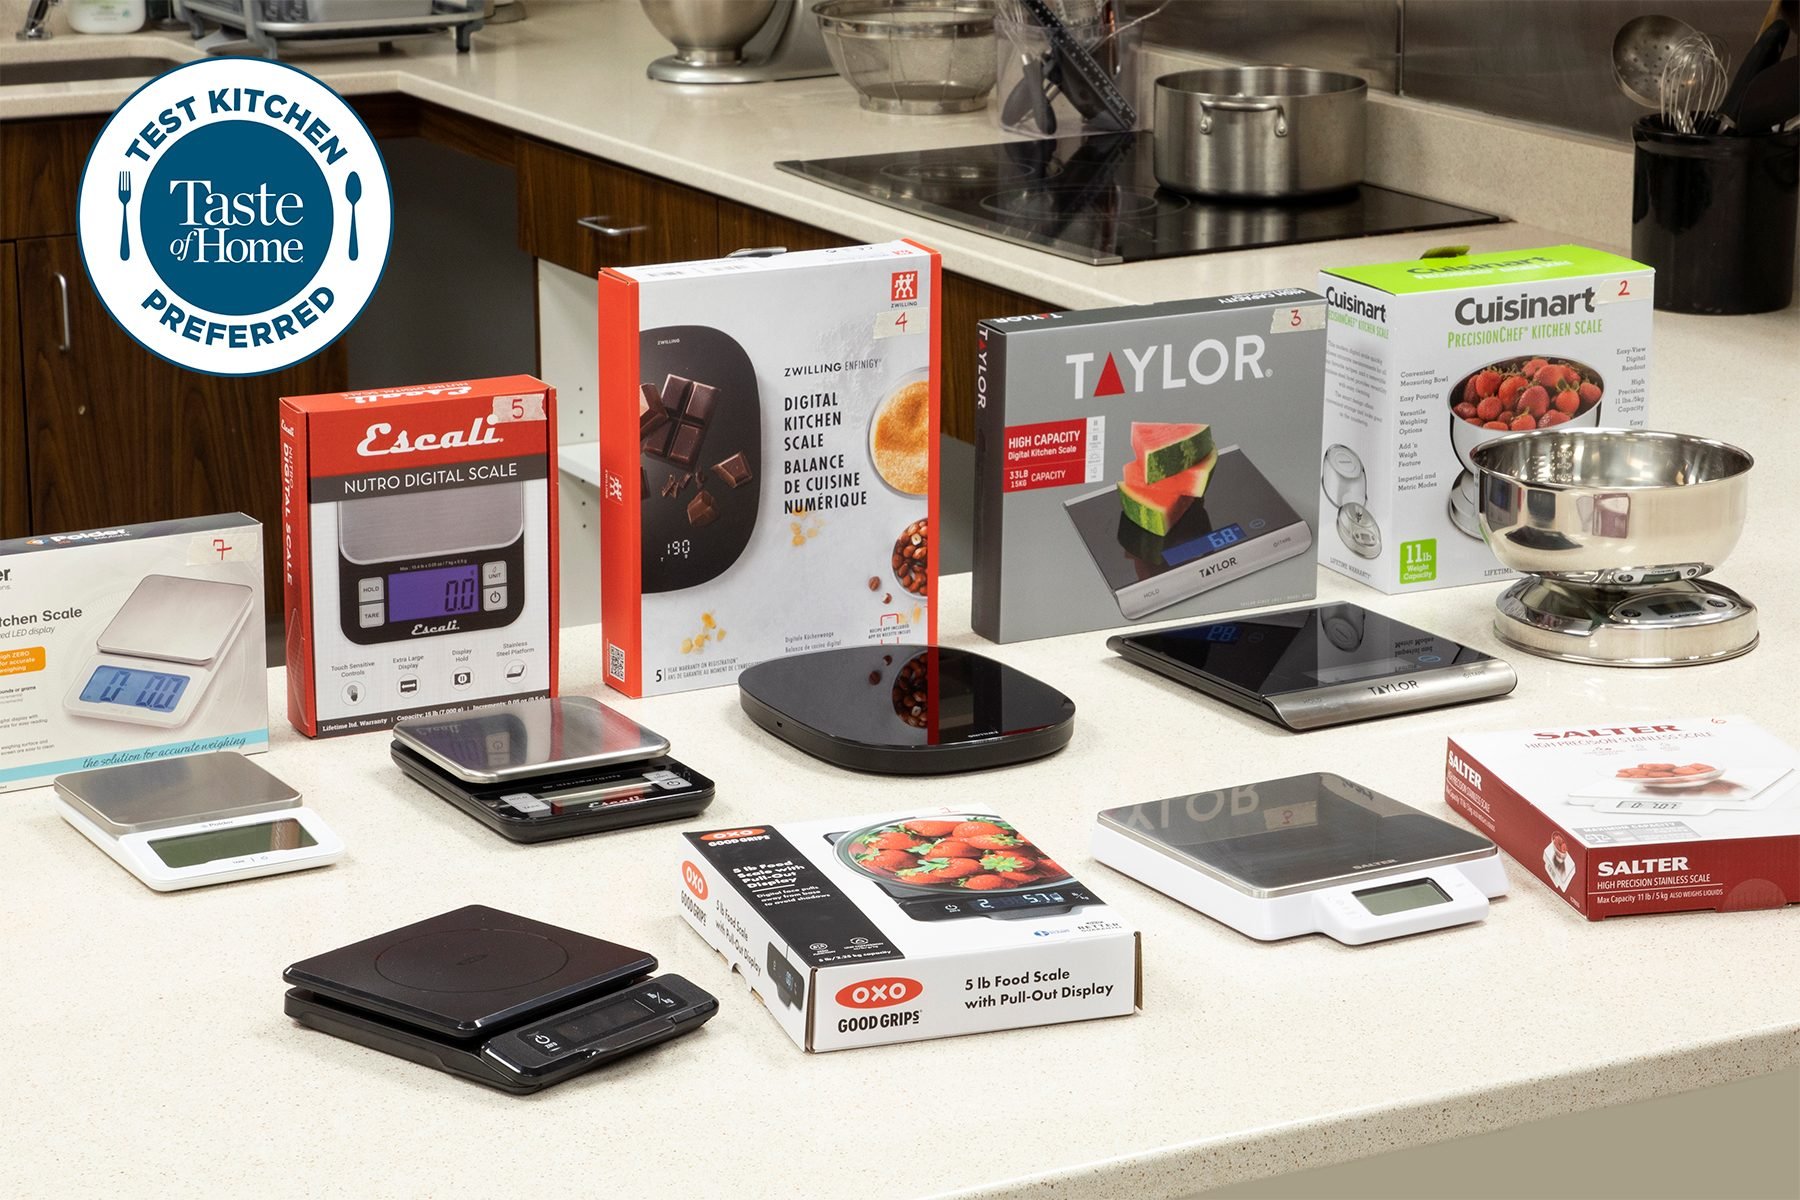 The Best Kitchen Scale for Home Cooks, According to Our Test Kitchen